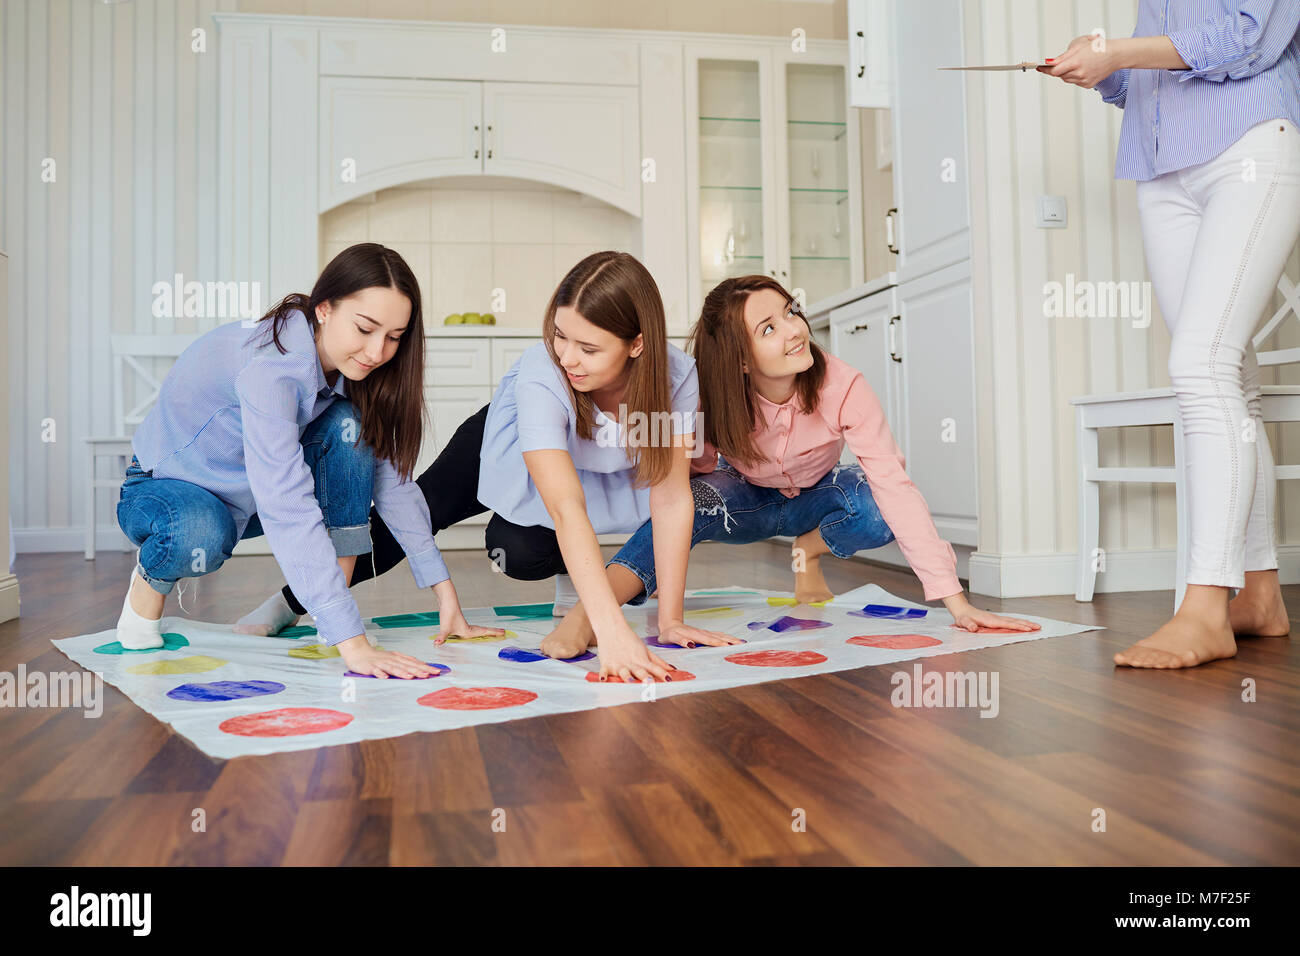 A group of friends play in games on the floor indoors. Stock Photo